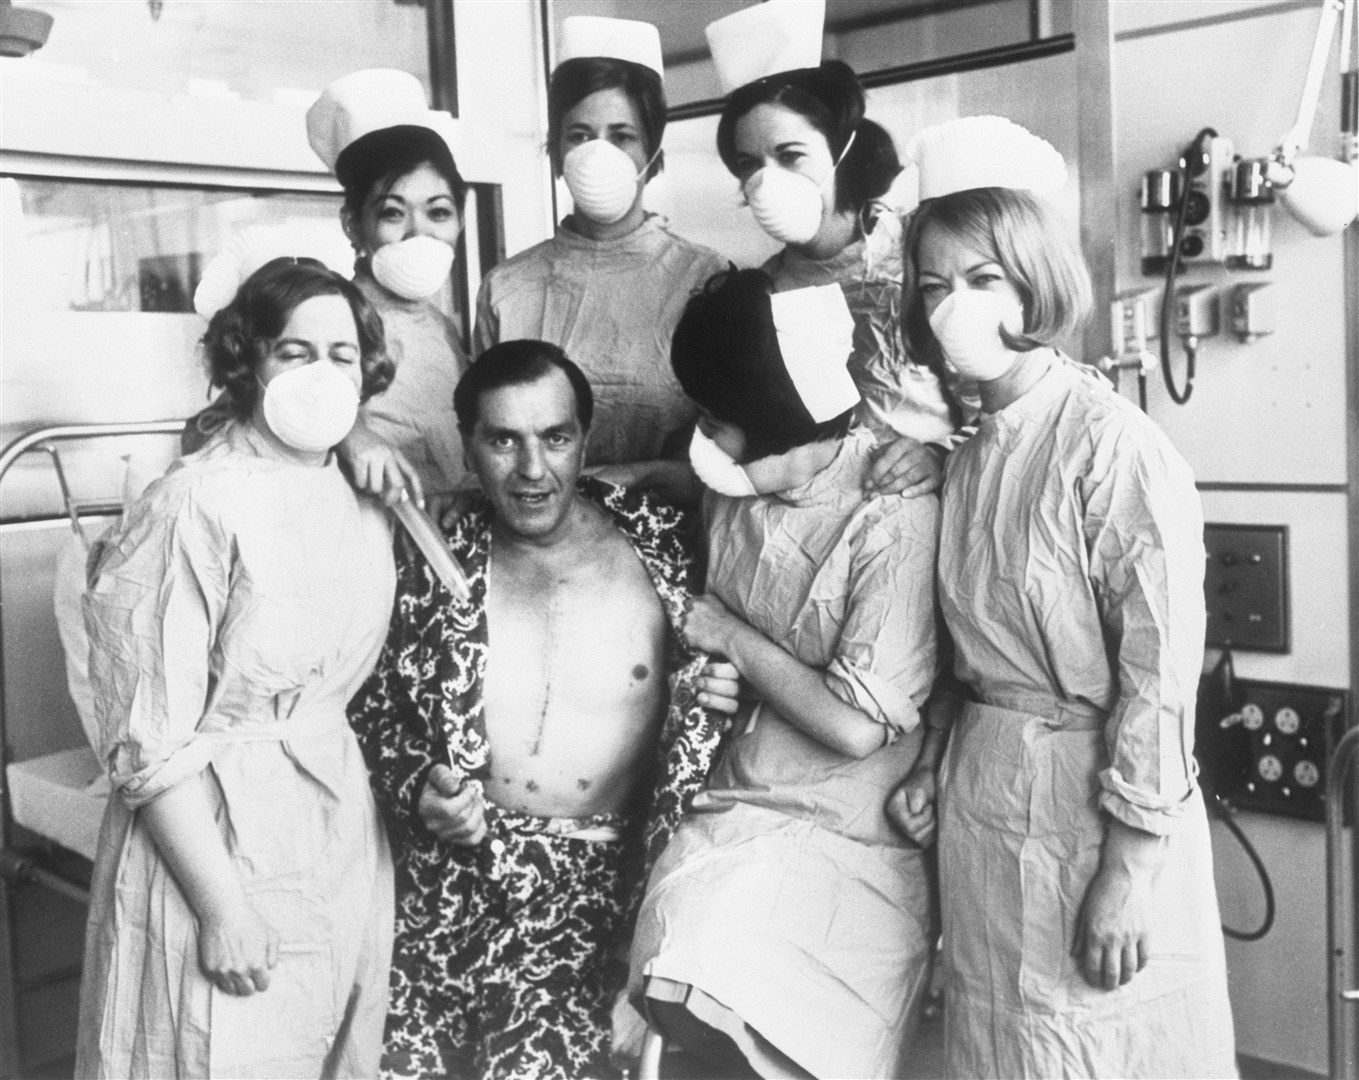 Frederick West, 45, Britain’s first heart transplant patient, pictured with his nurses in his special suite at the National Heart Hospital in Marylebone, London, where the operation took place (PA Archive)